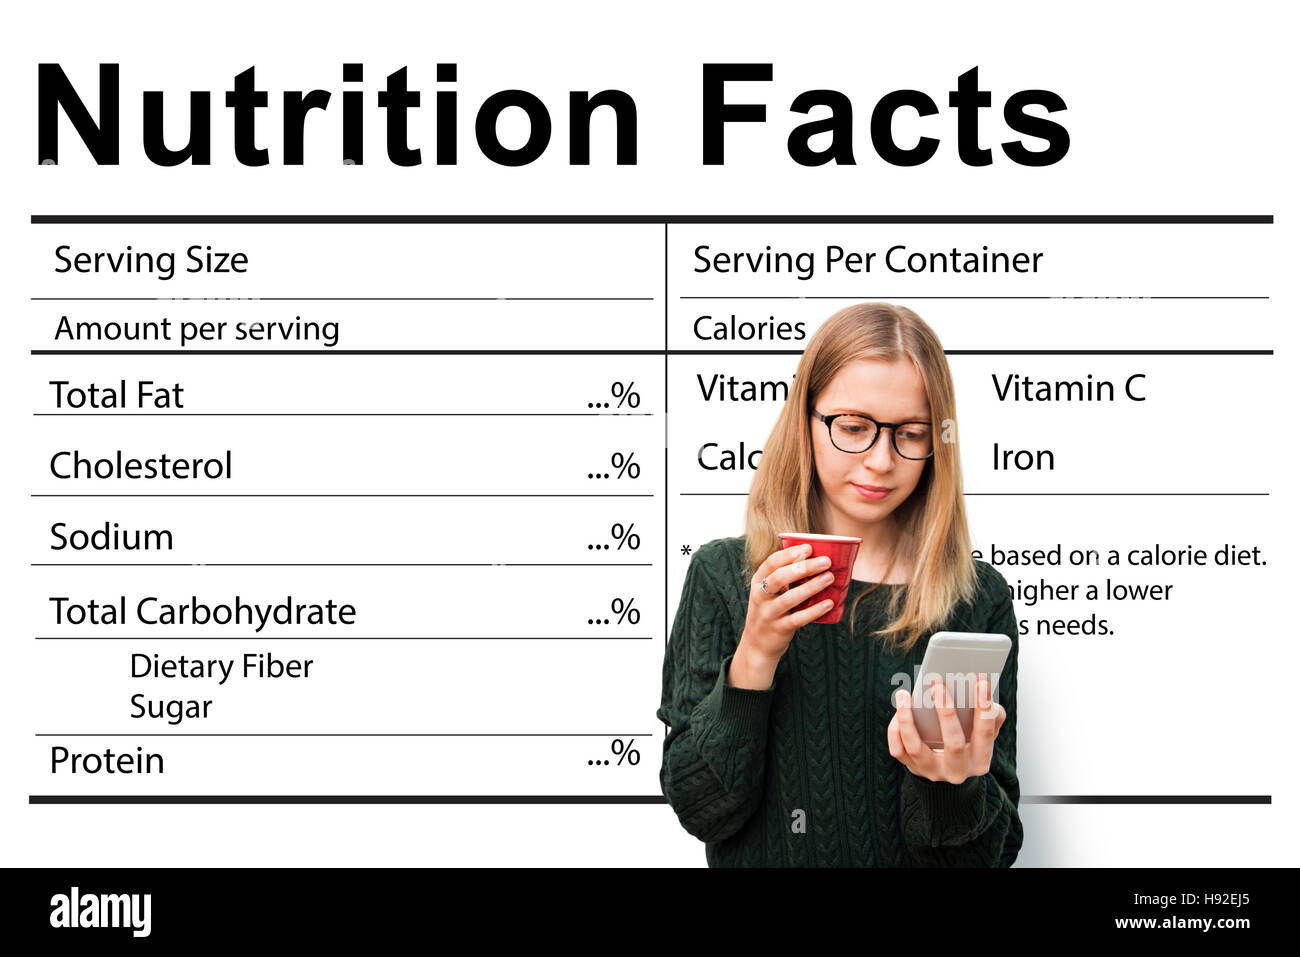 Nutrition Facts Health Medicine Eatting Food Diet Concept Stock Photo